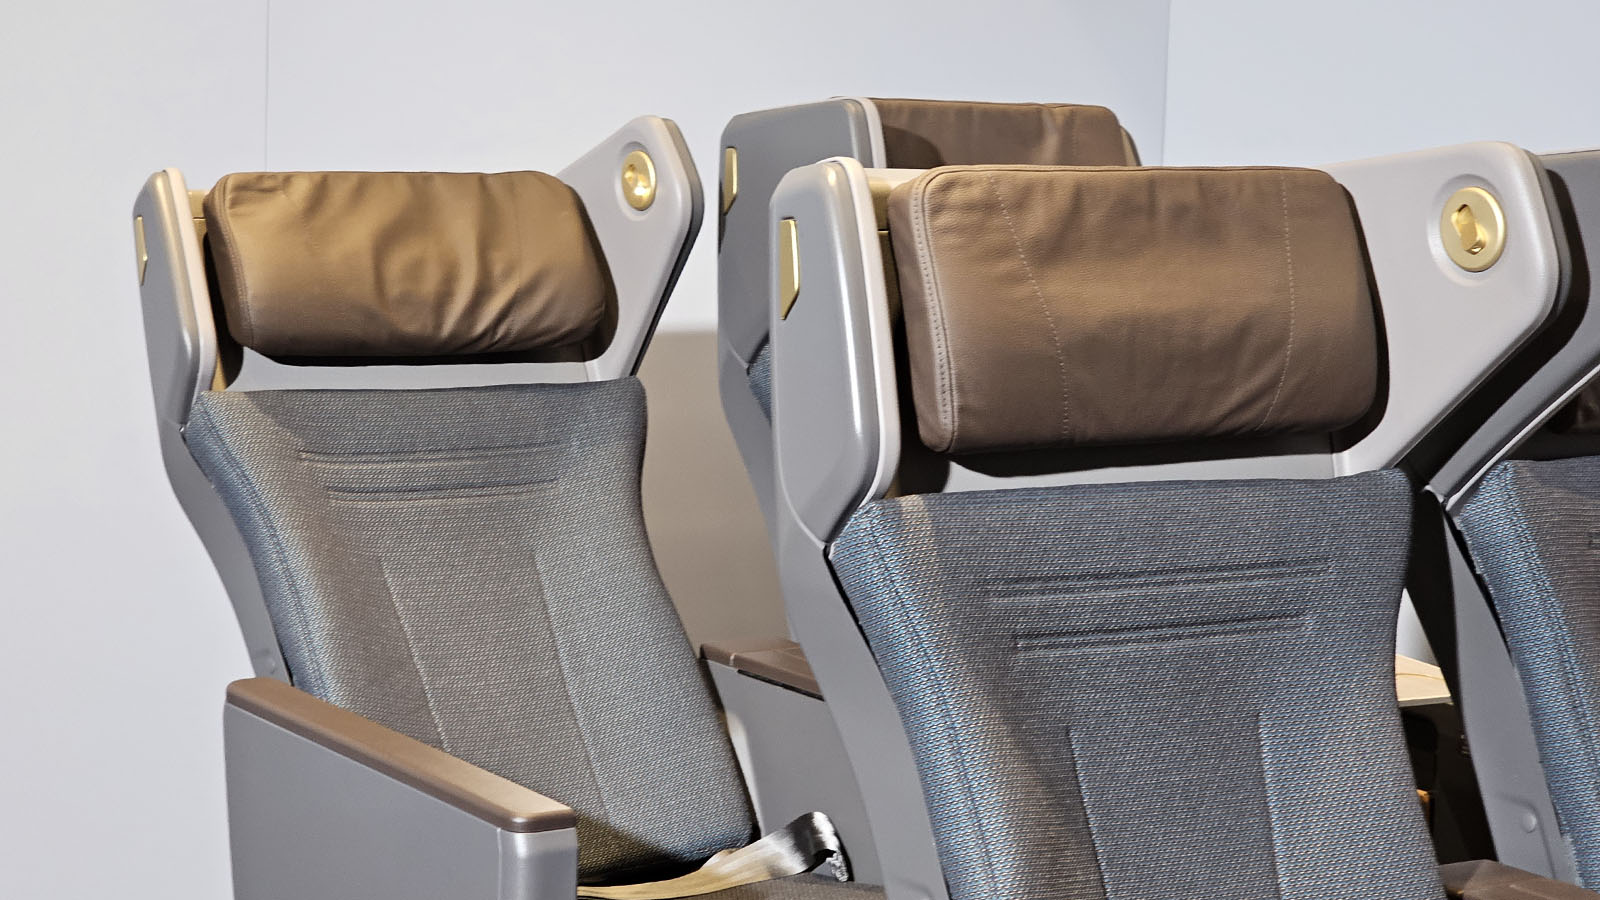 Reclined in Cathay Pacific's new Premium Economy